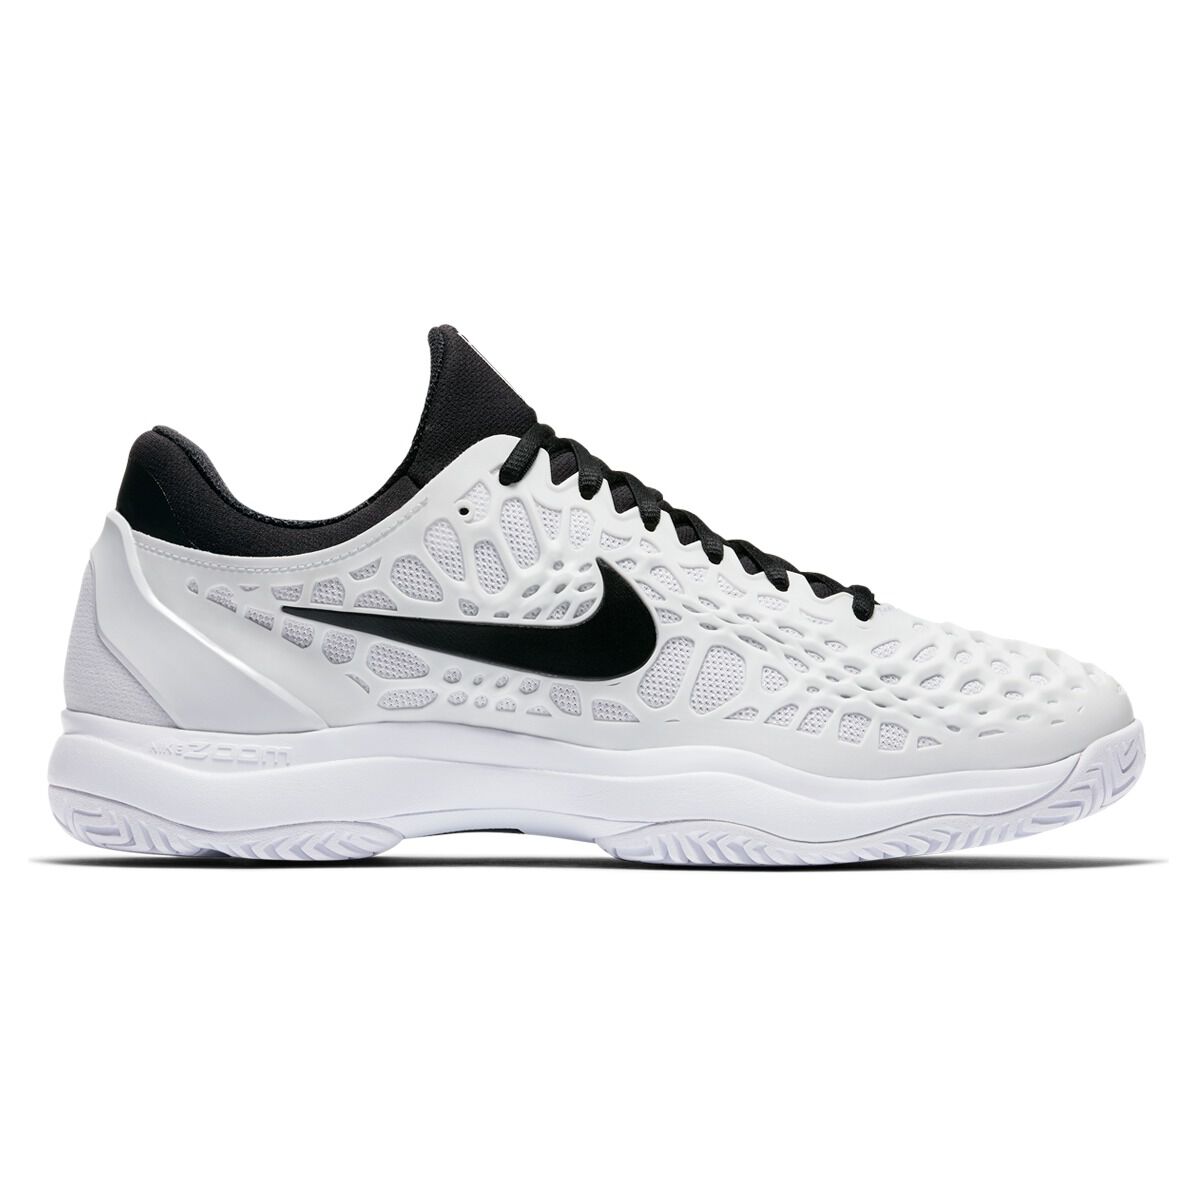 Nike Air Zoom Cage 3 Mens Tennis Shoes 